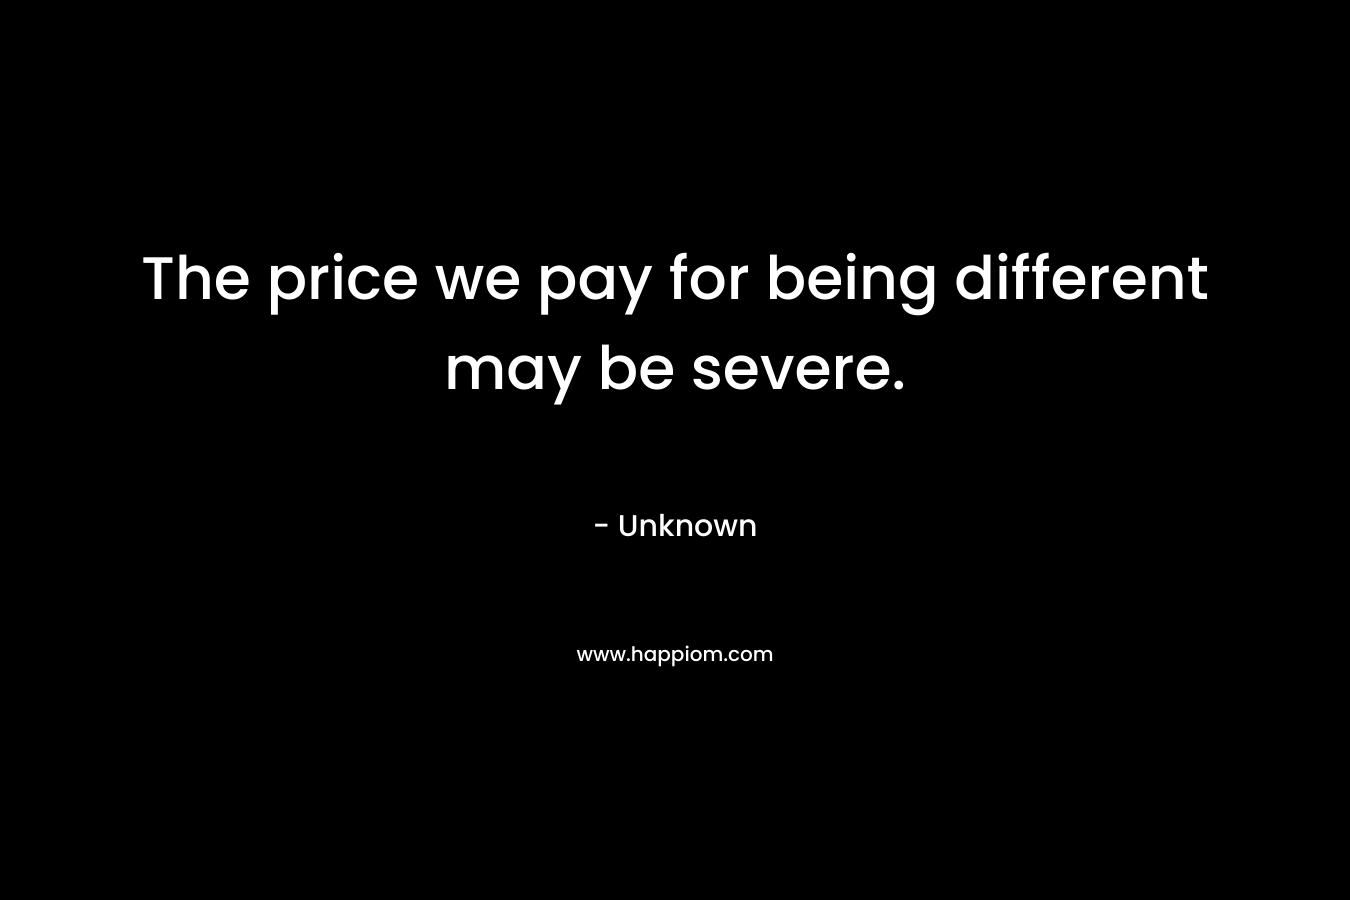 The price we pay for being different may be severe.